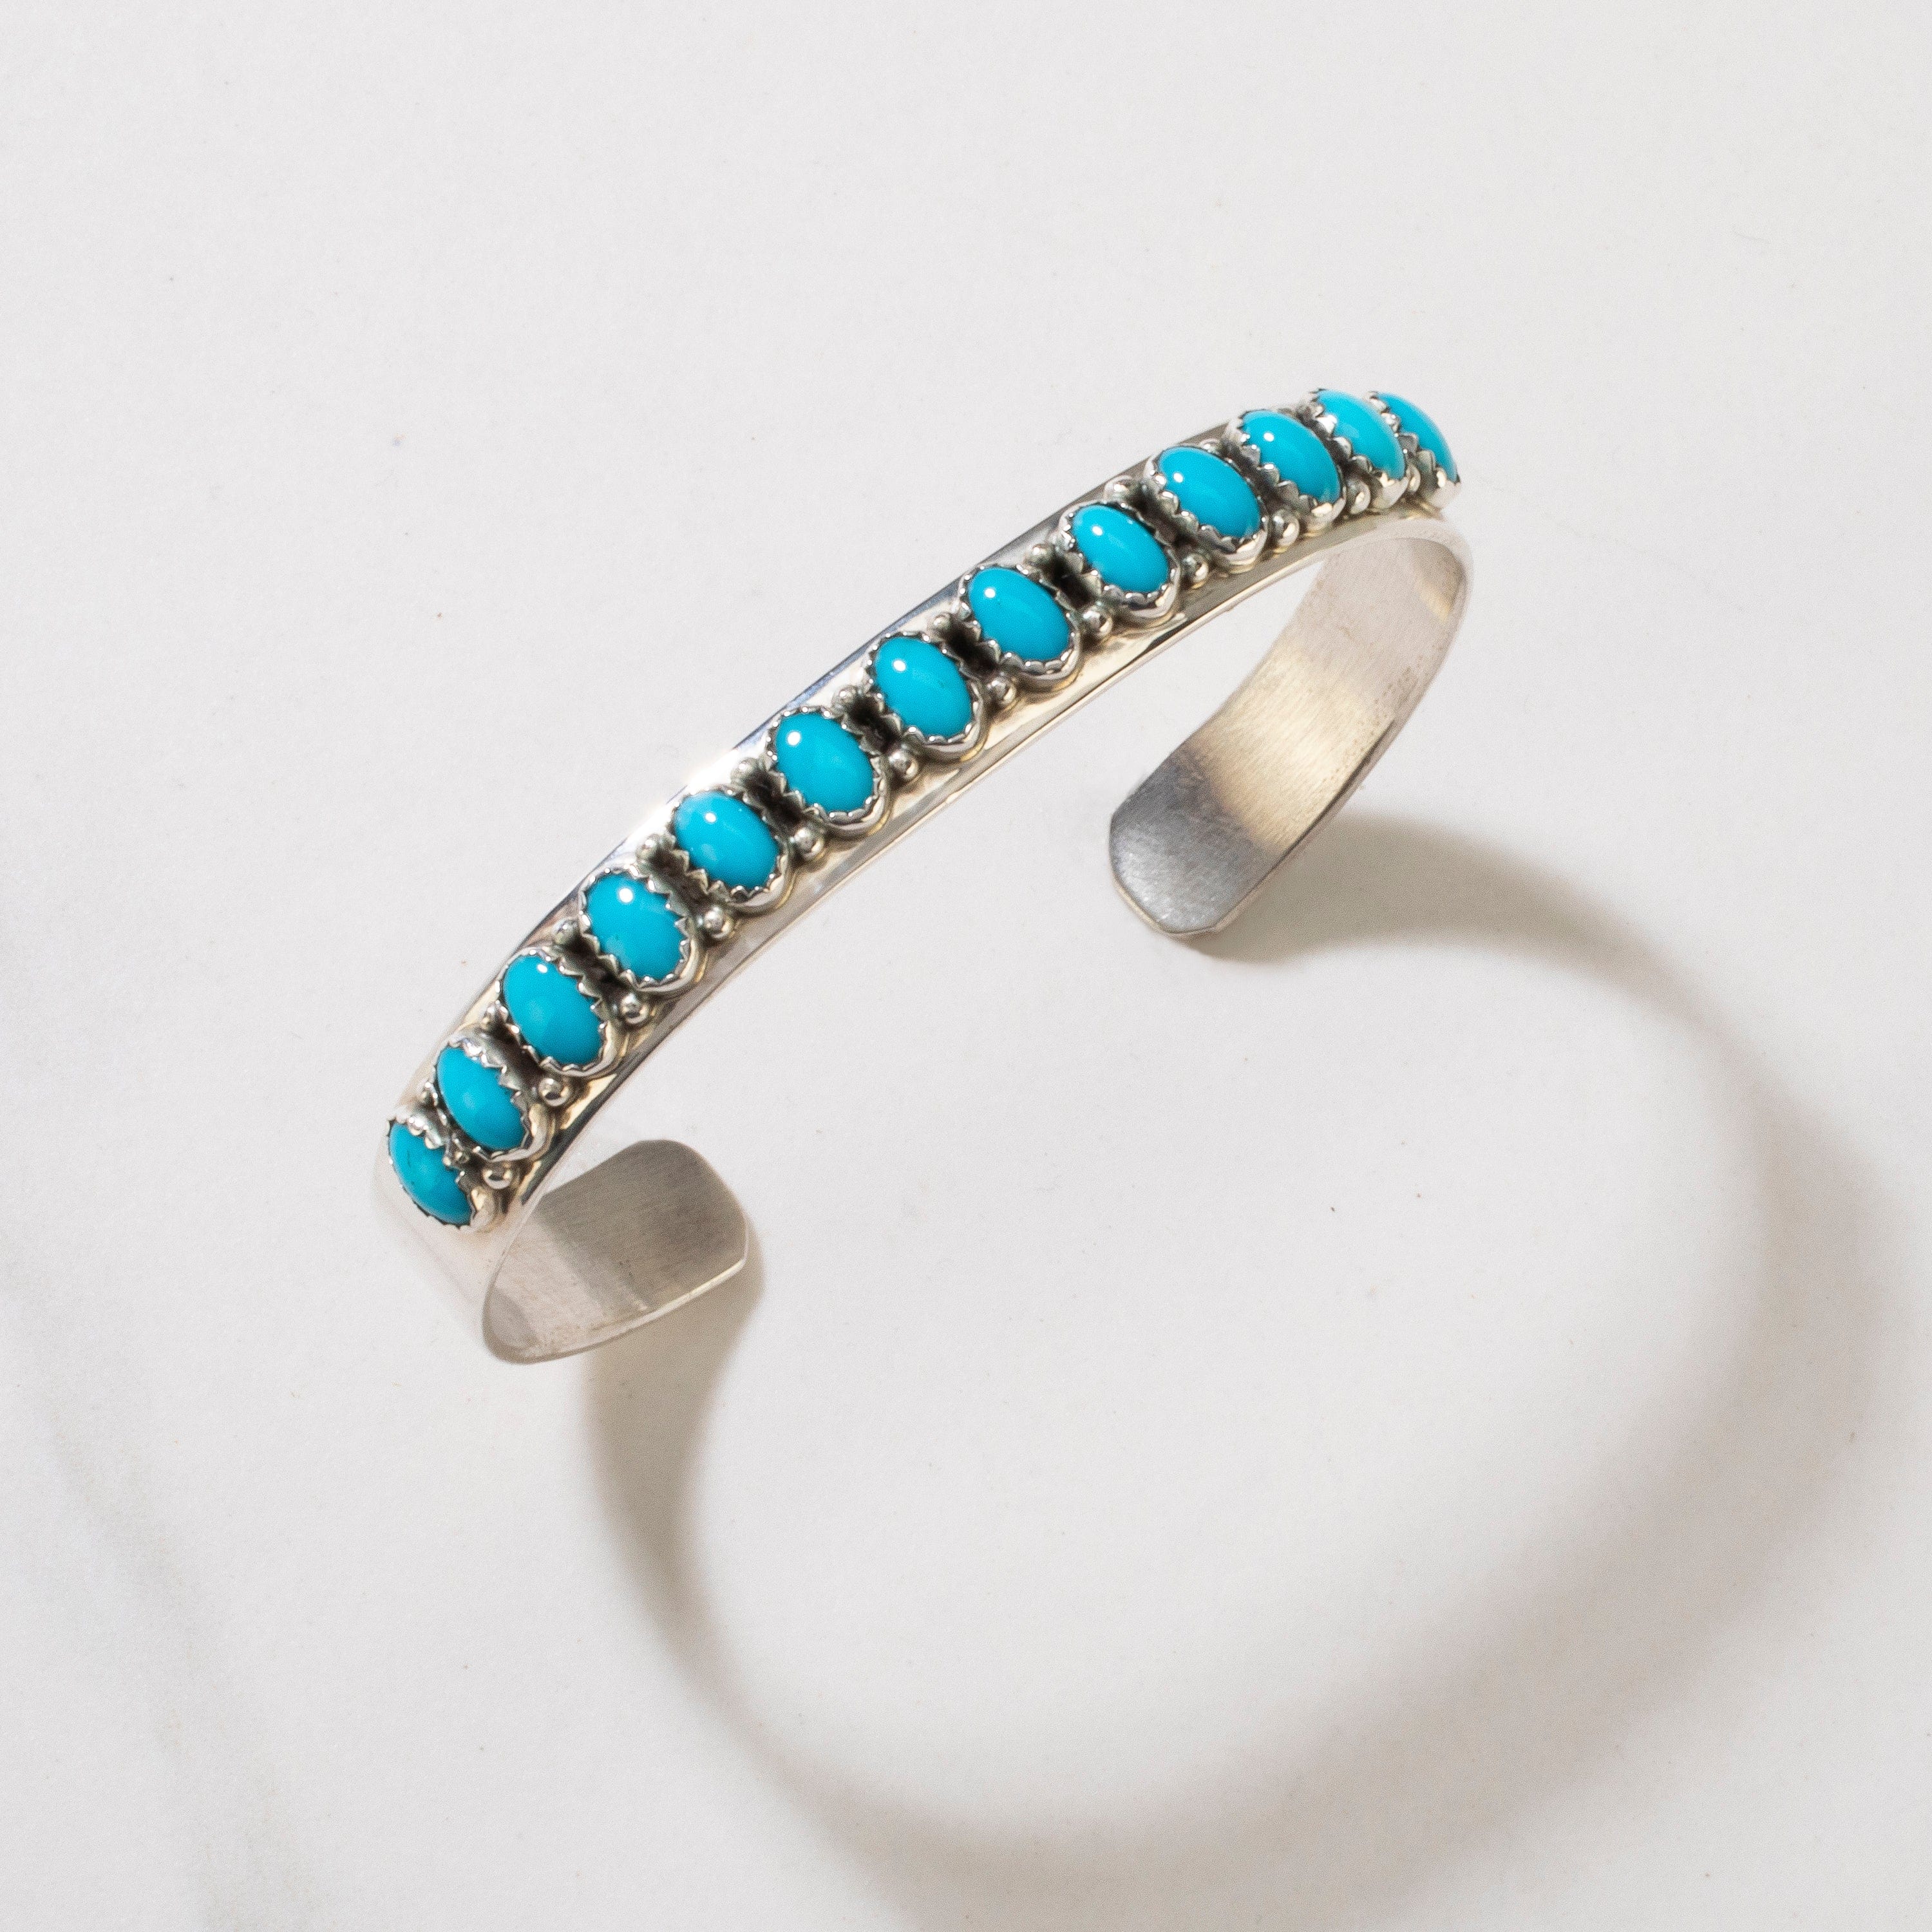 Kalifano Native American Jewelry Patrick Yazzie Sleeping Beauty Turquoise Navajo USA Native American Made 925 Sterling Silver Cuff NAB800.014